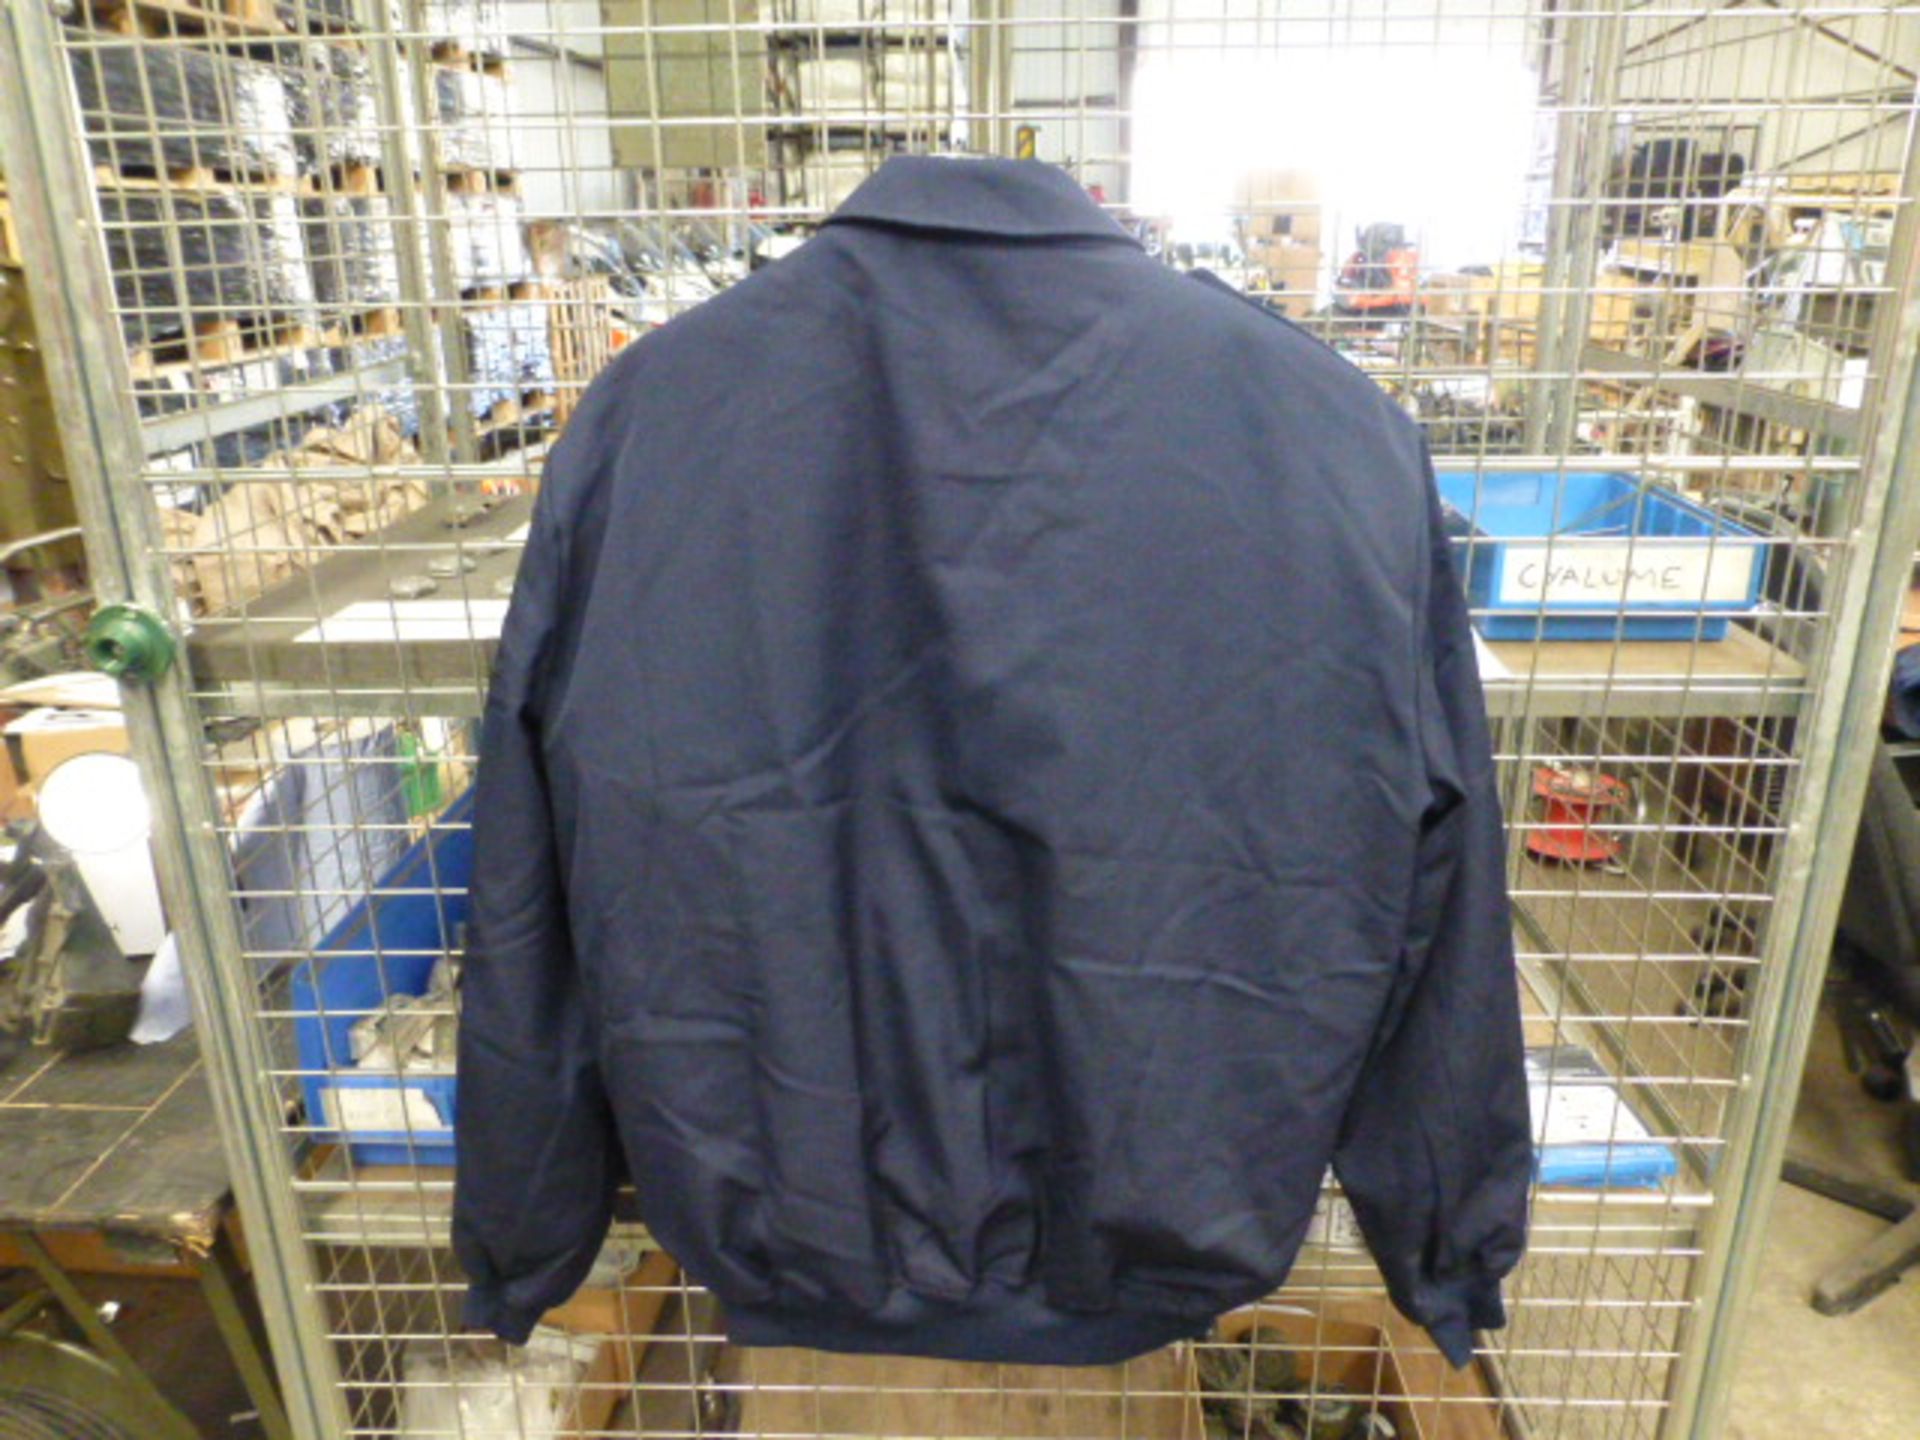 RAF Bomber Jacket with Removable Liner, Size XL - Image 2 of 4